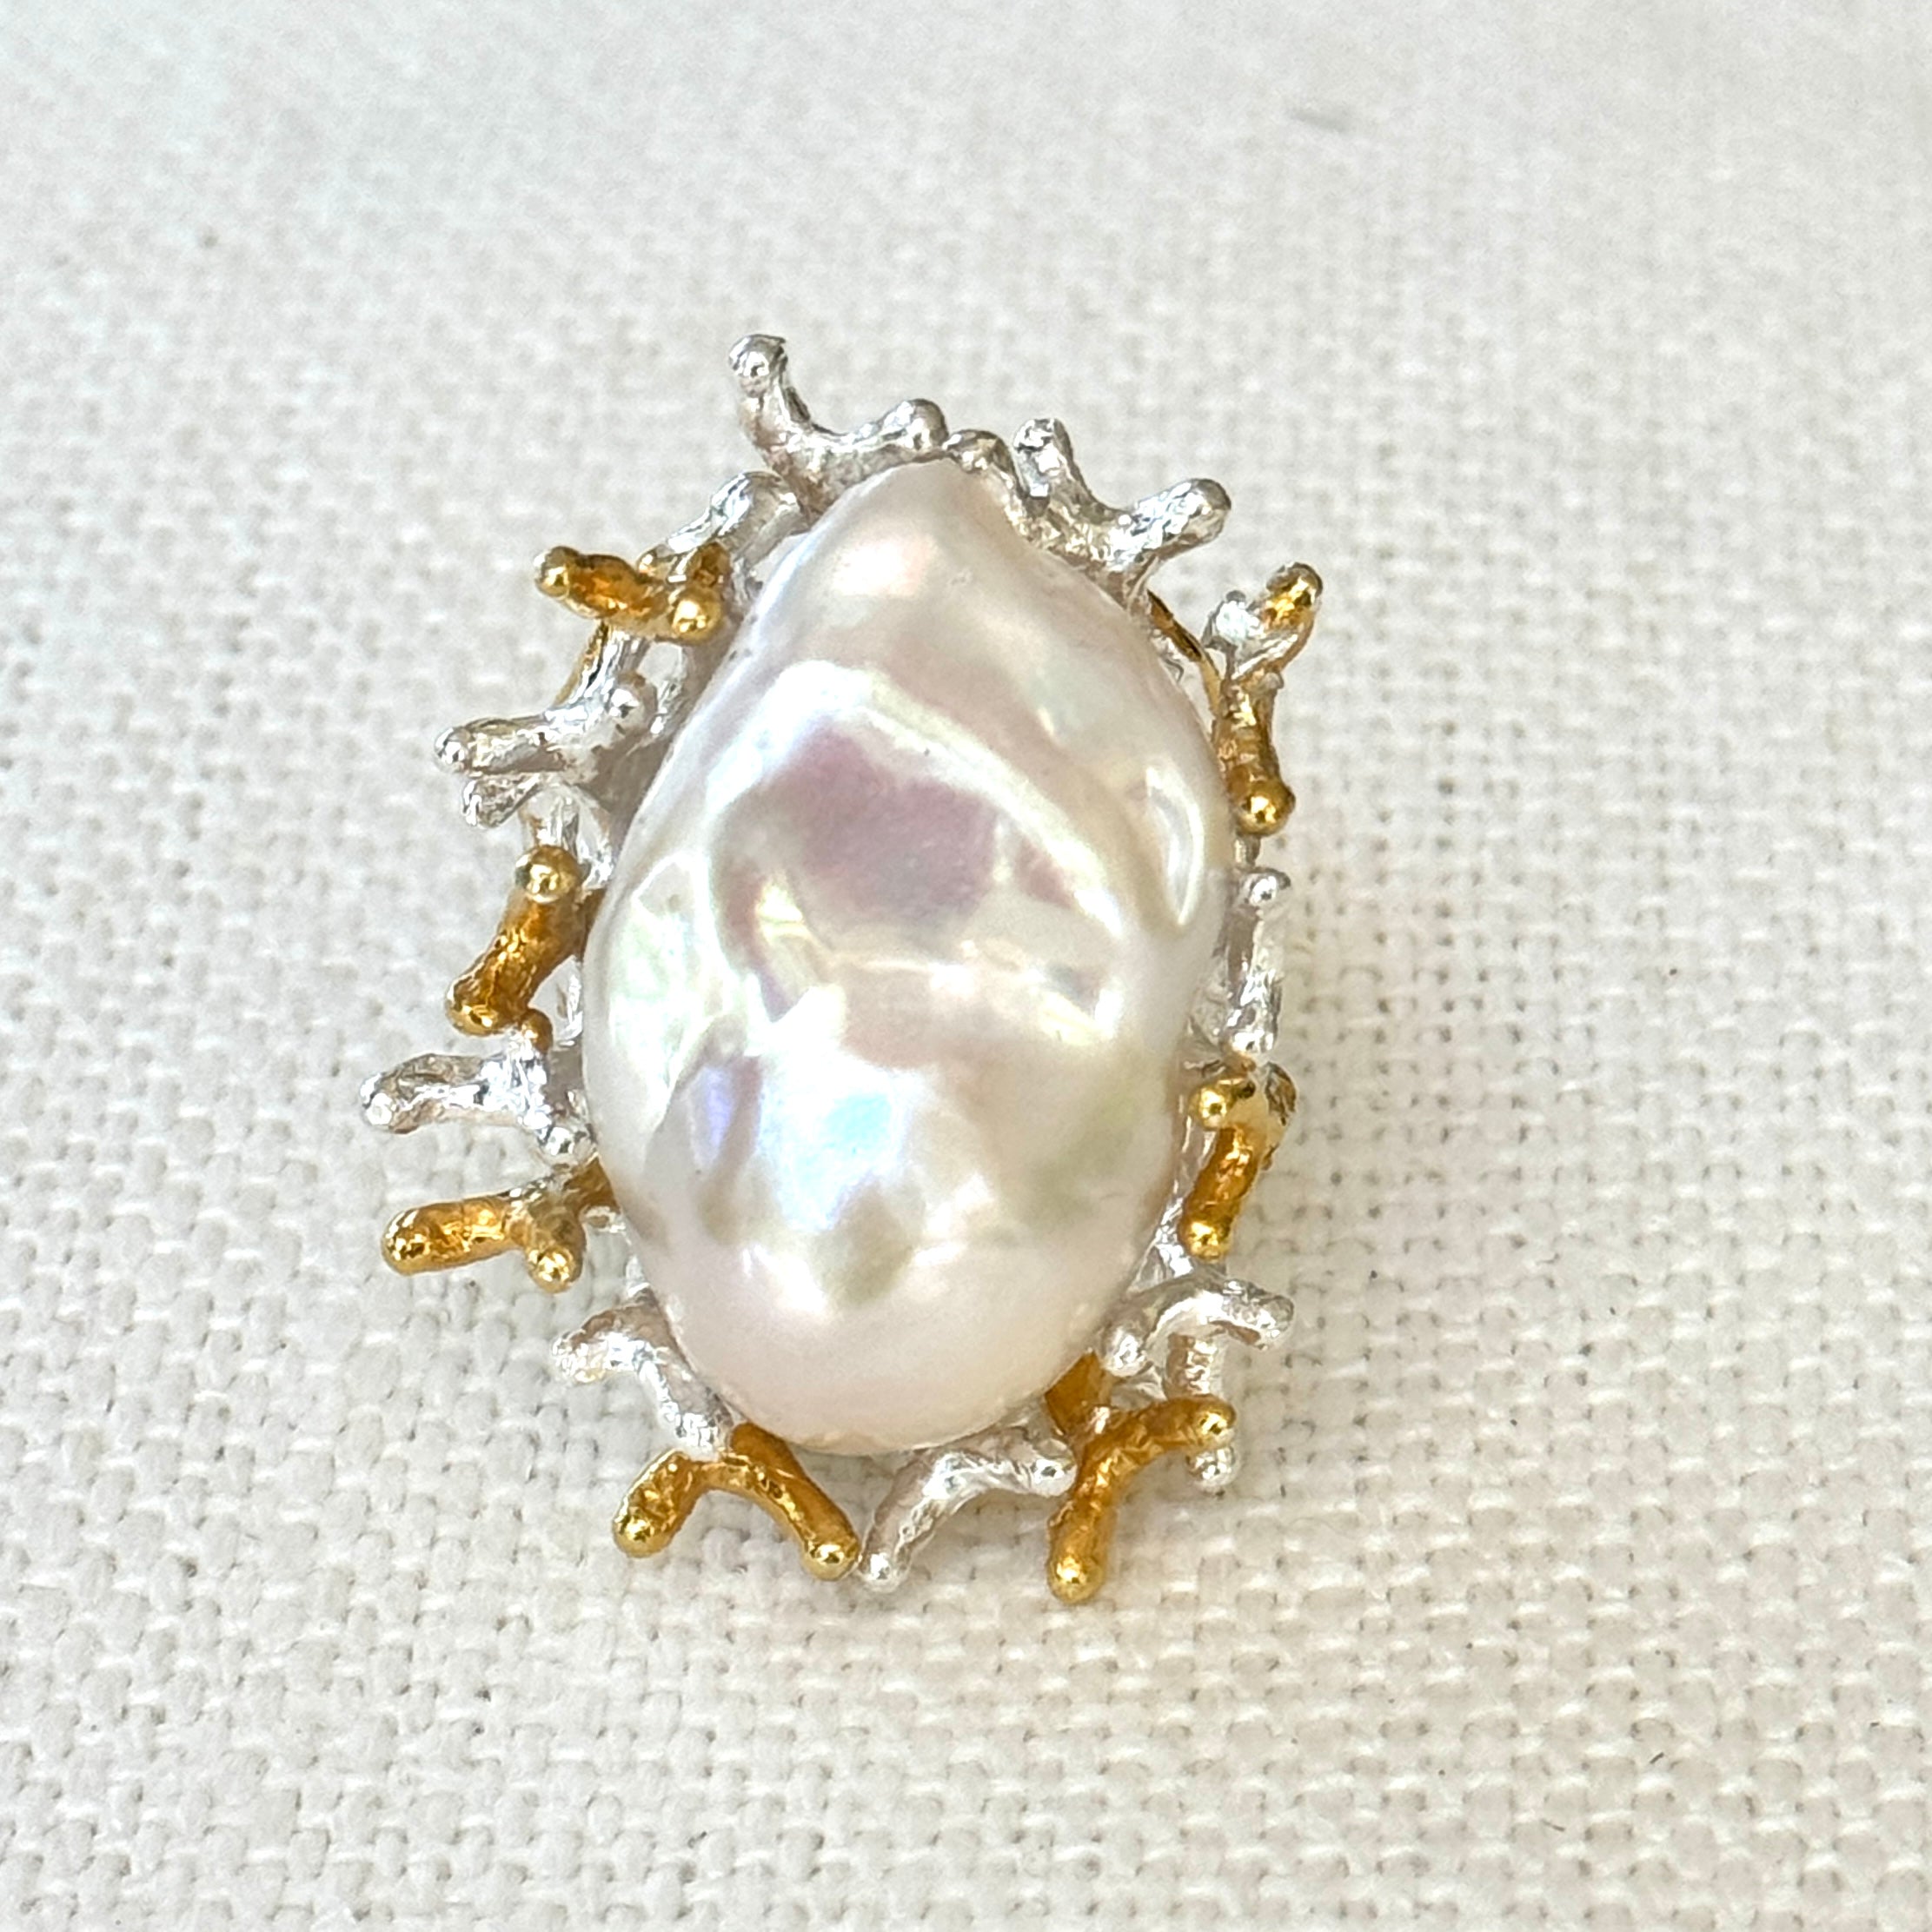 Baroque Pearl Ring - size 9